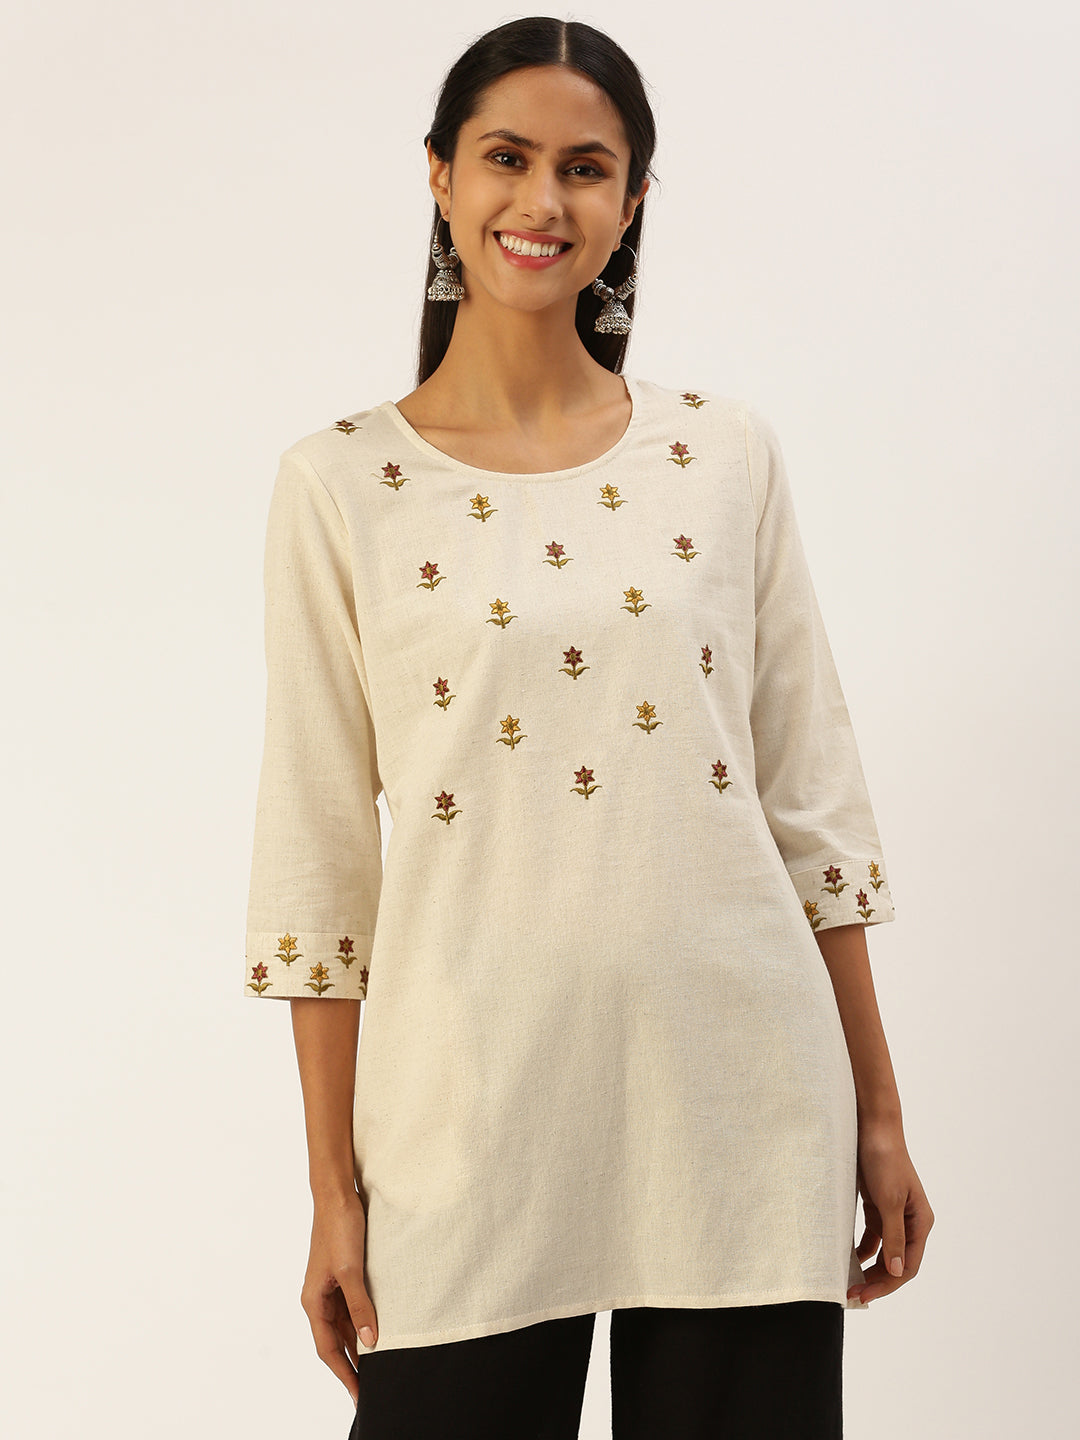 Beige Floral Embroidered Tunic